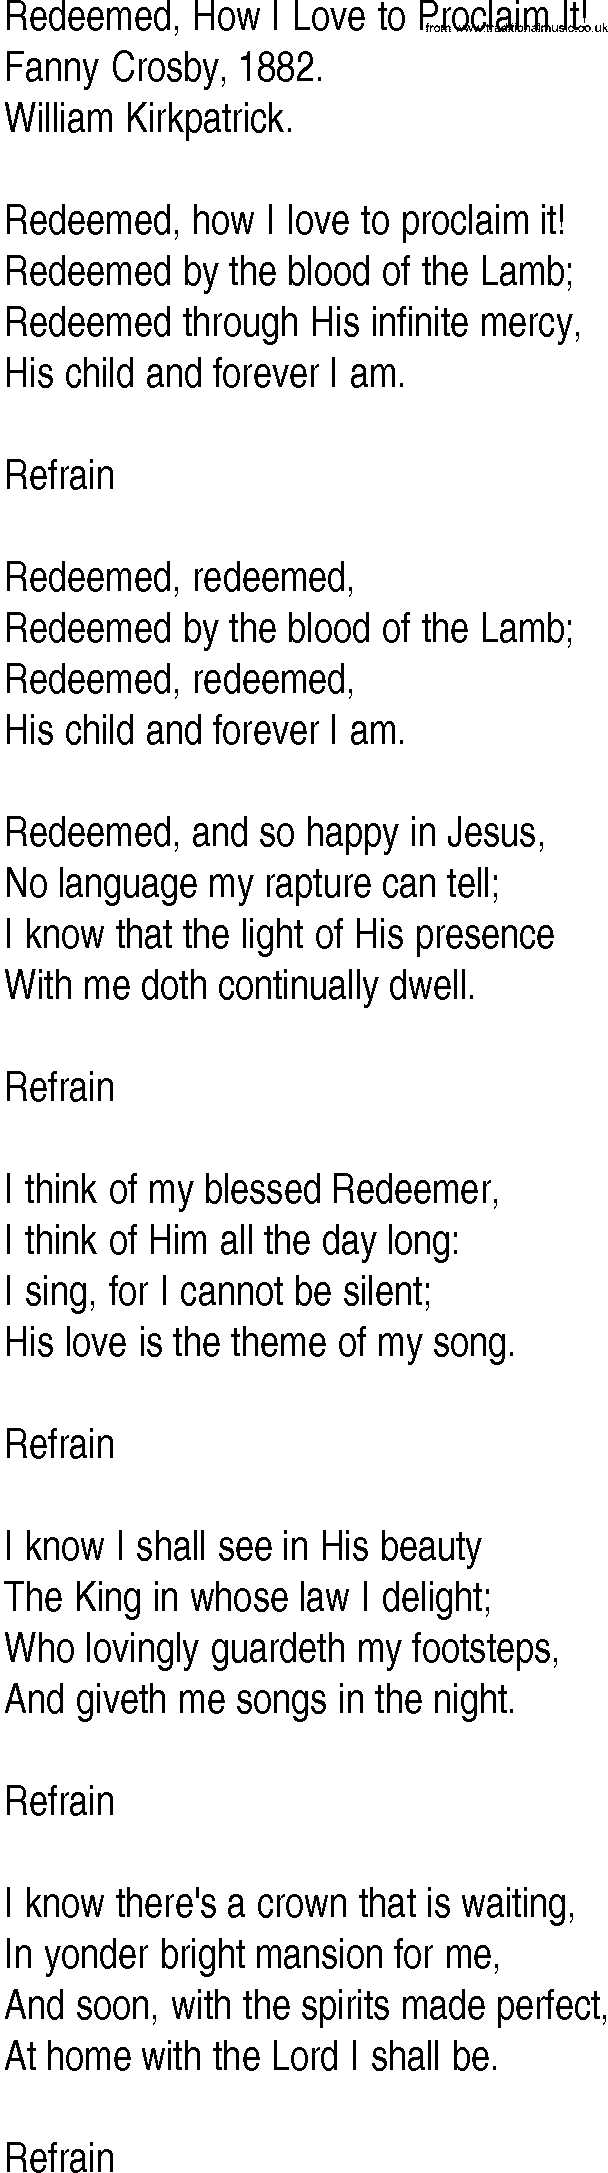 redeemed how i love to proclaim it fanny crosby